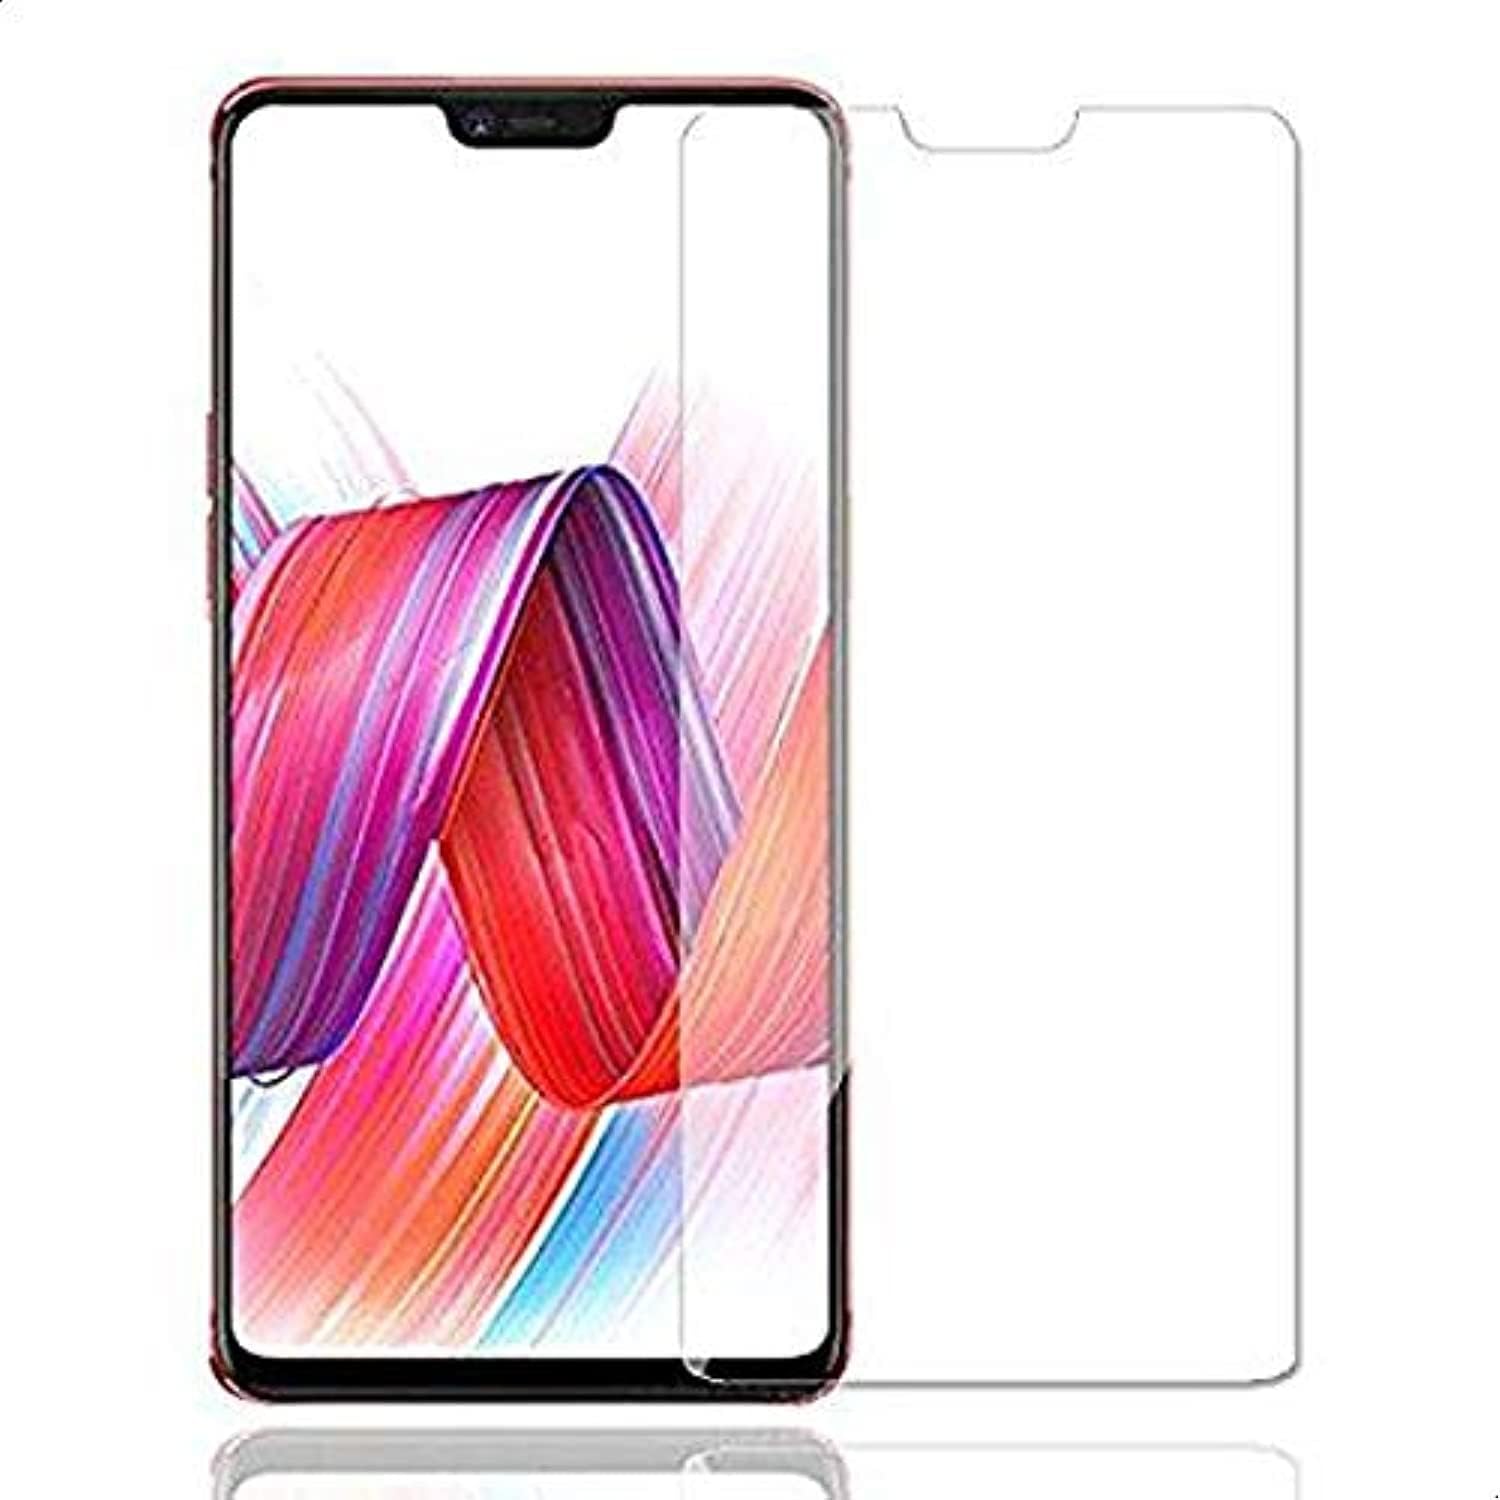 Glass Screen Protector for Oppo F7 - Clear